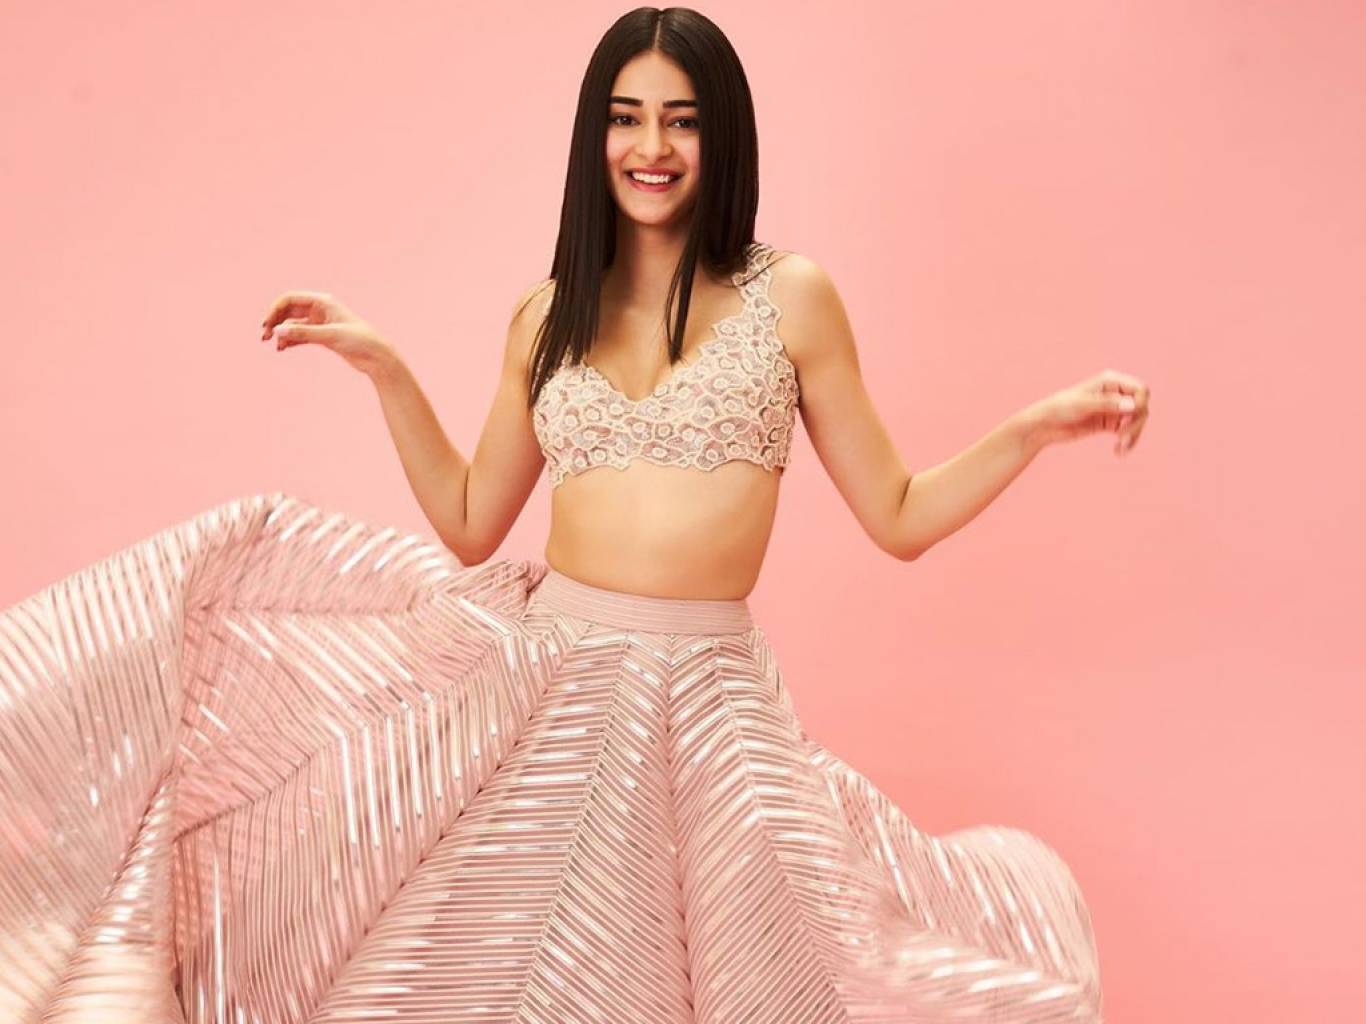 ANANYA PANDEY WIKI - BIOGRAPHY- AGE -HEIGHT -BOYFRIEND -FAMILY AND MORE